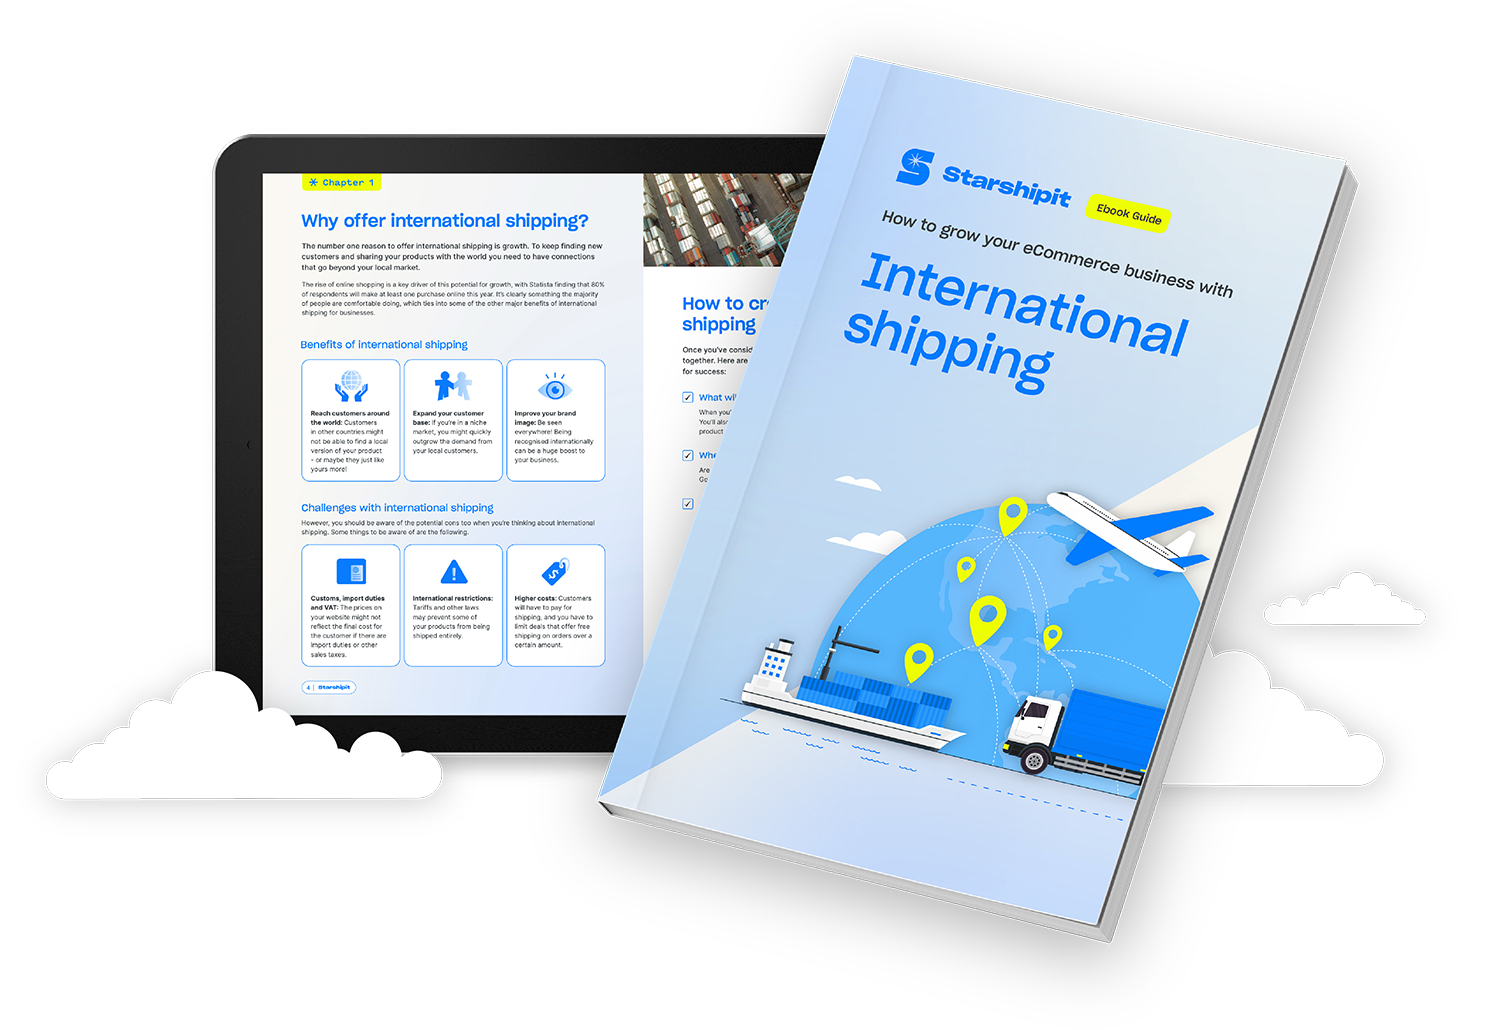 How to grow your eCommerce Business with International Shipping